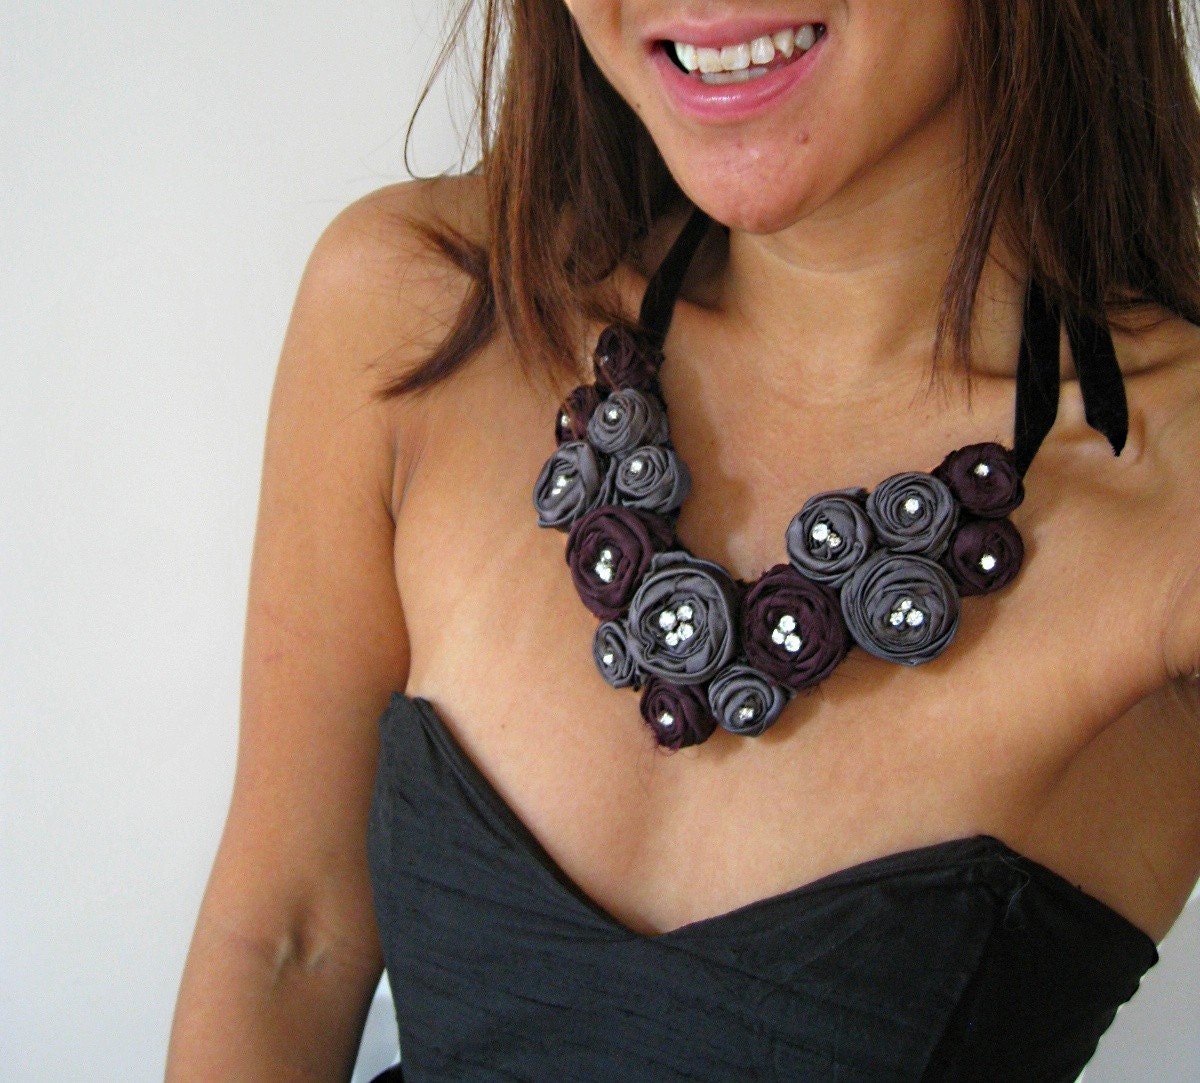 A Girls' Night Out - Statement Bib Rosette Necklace - Can be custom made to your colour preference